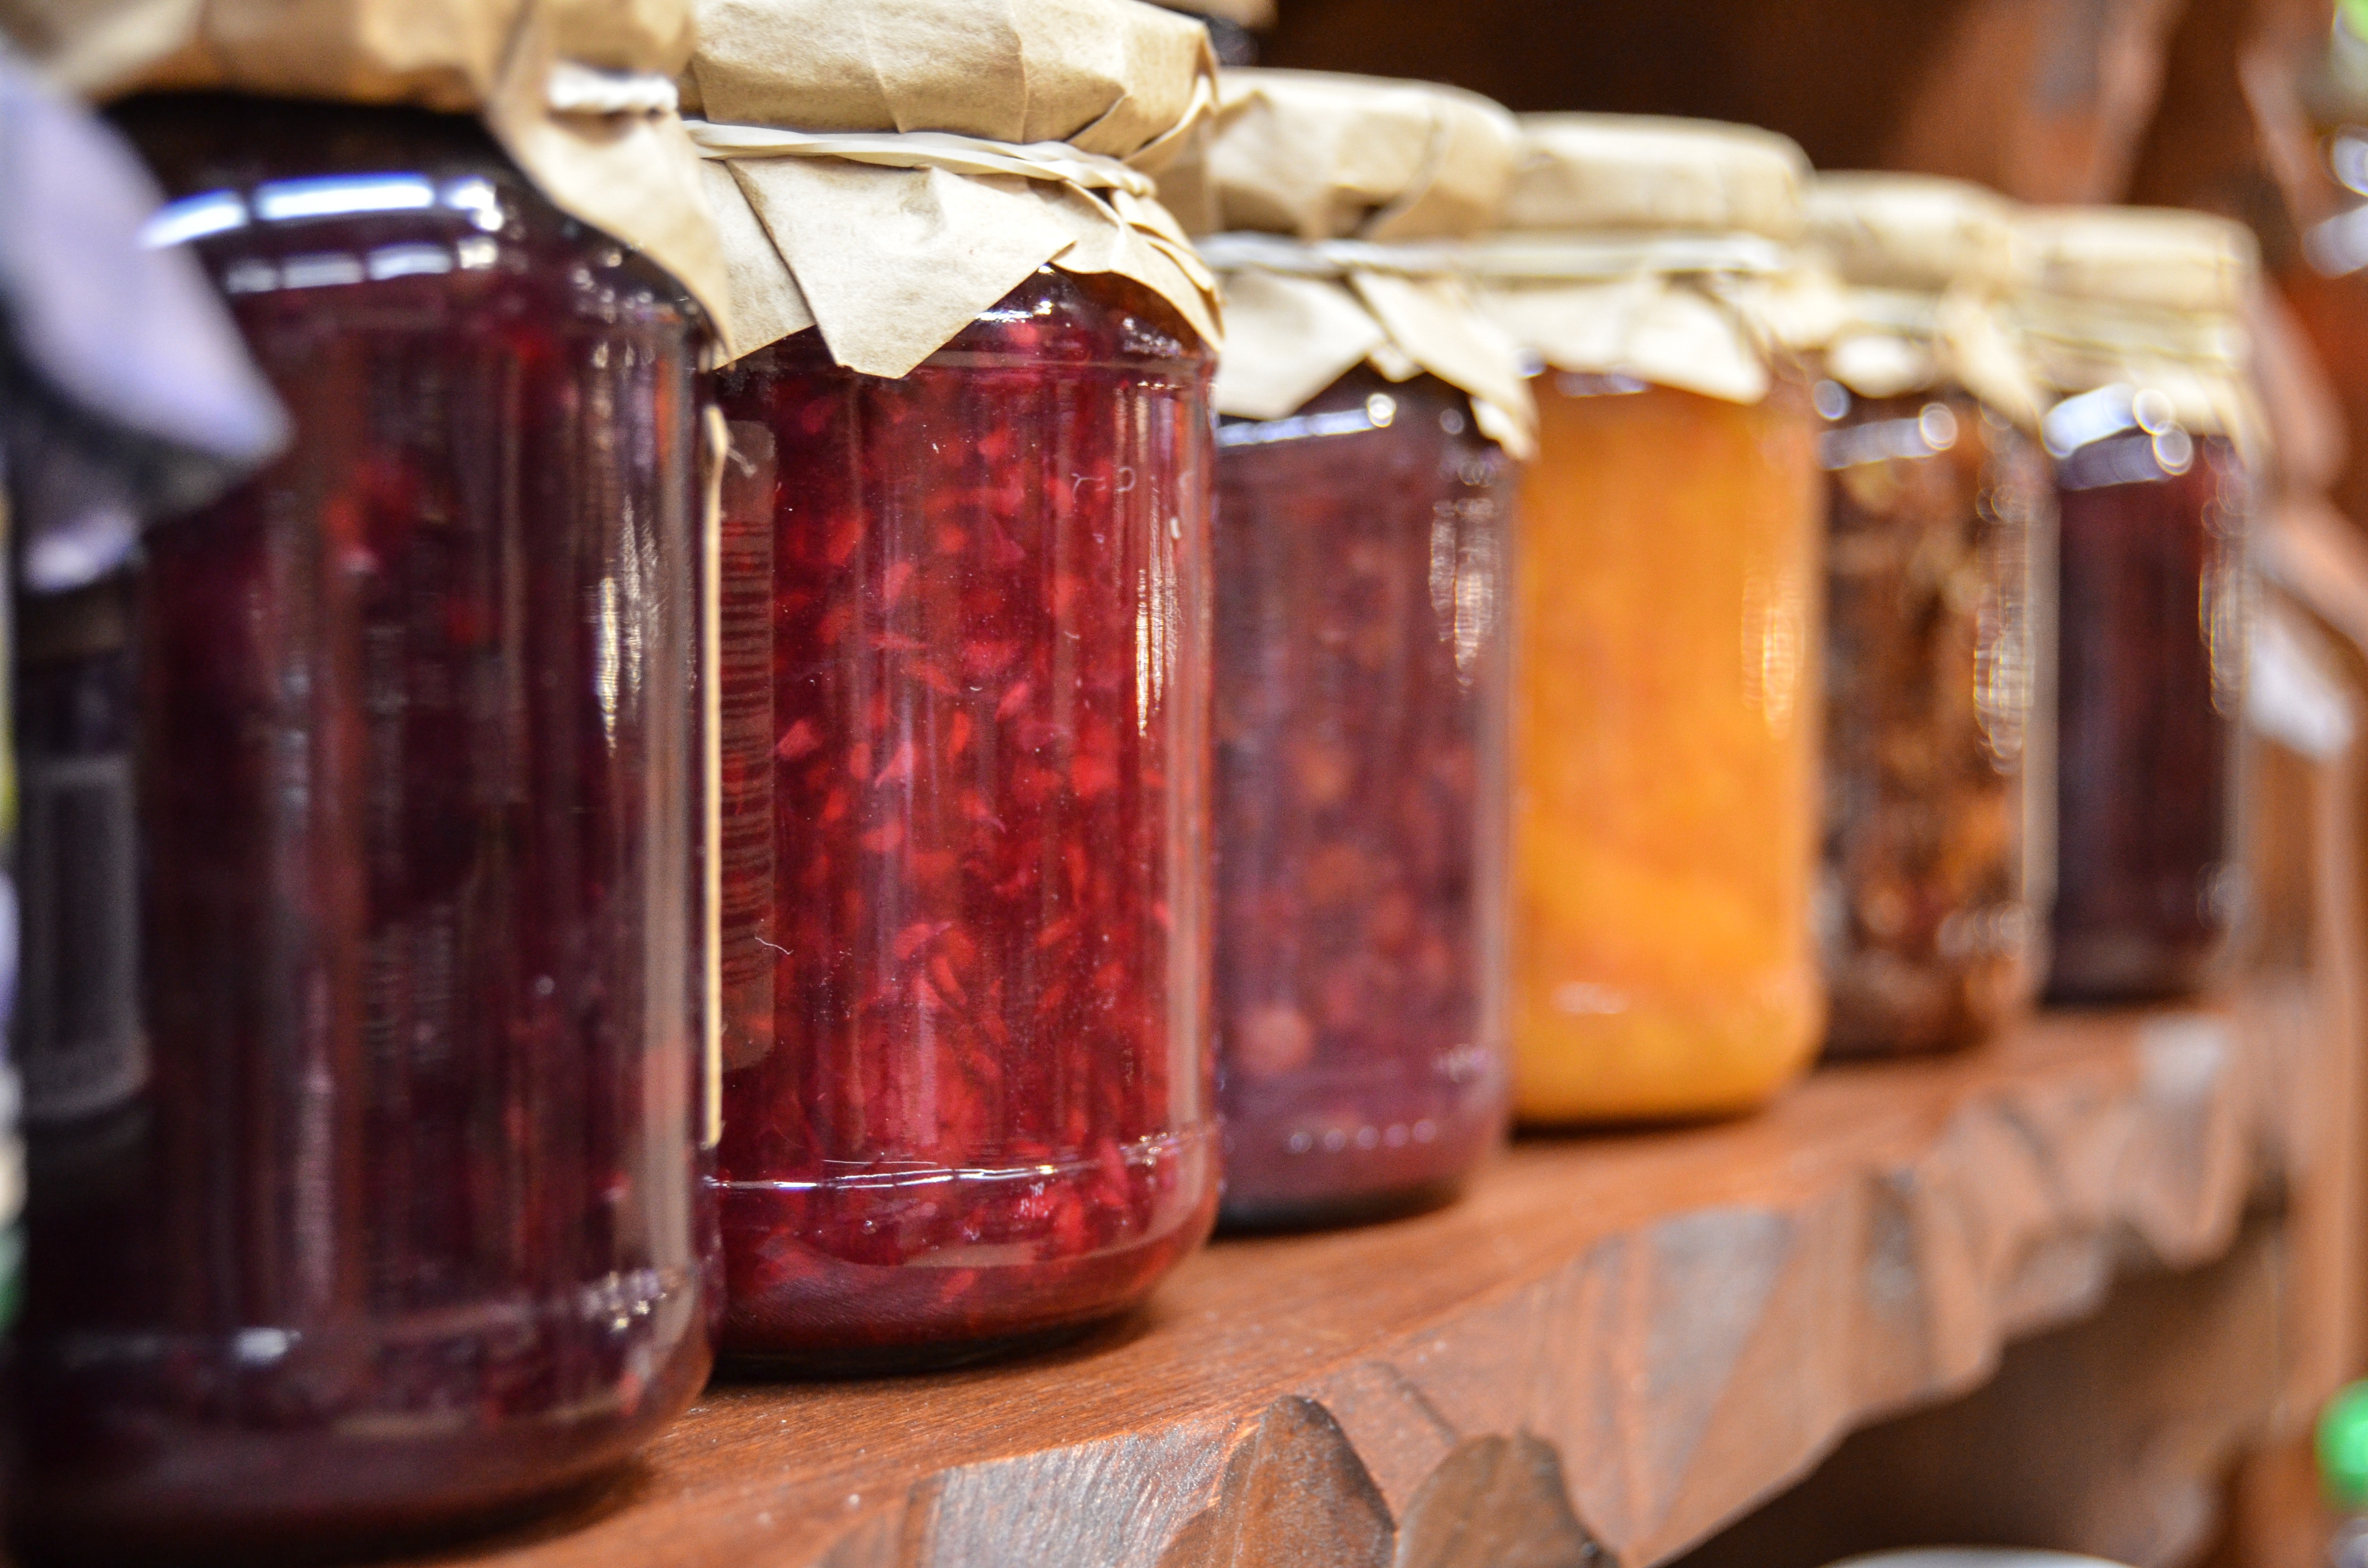 Jams and jellies in jars.